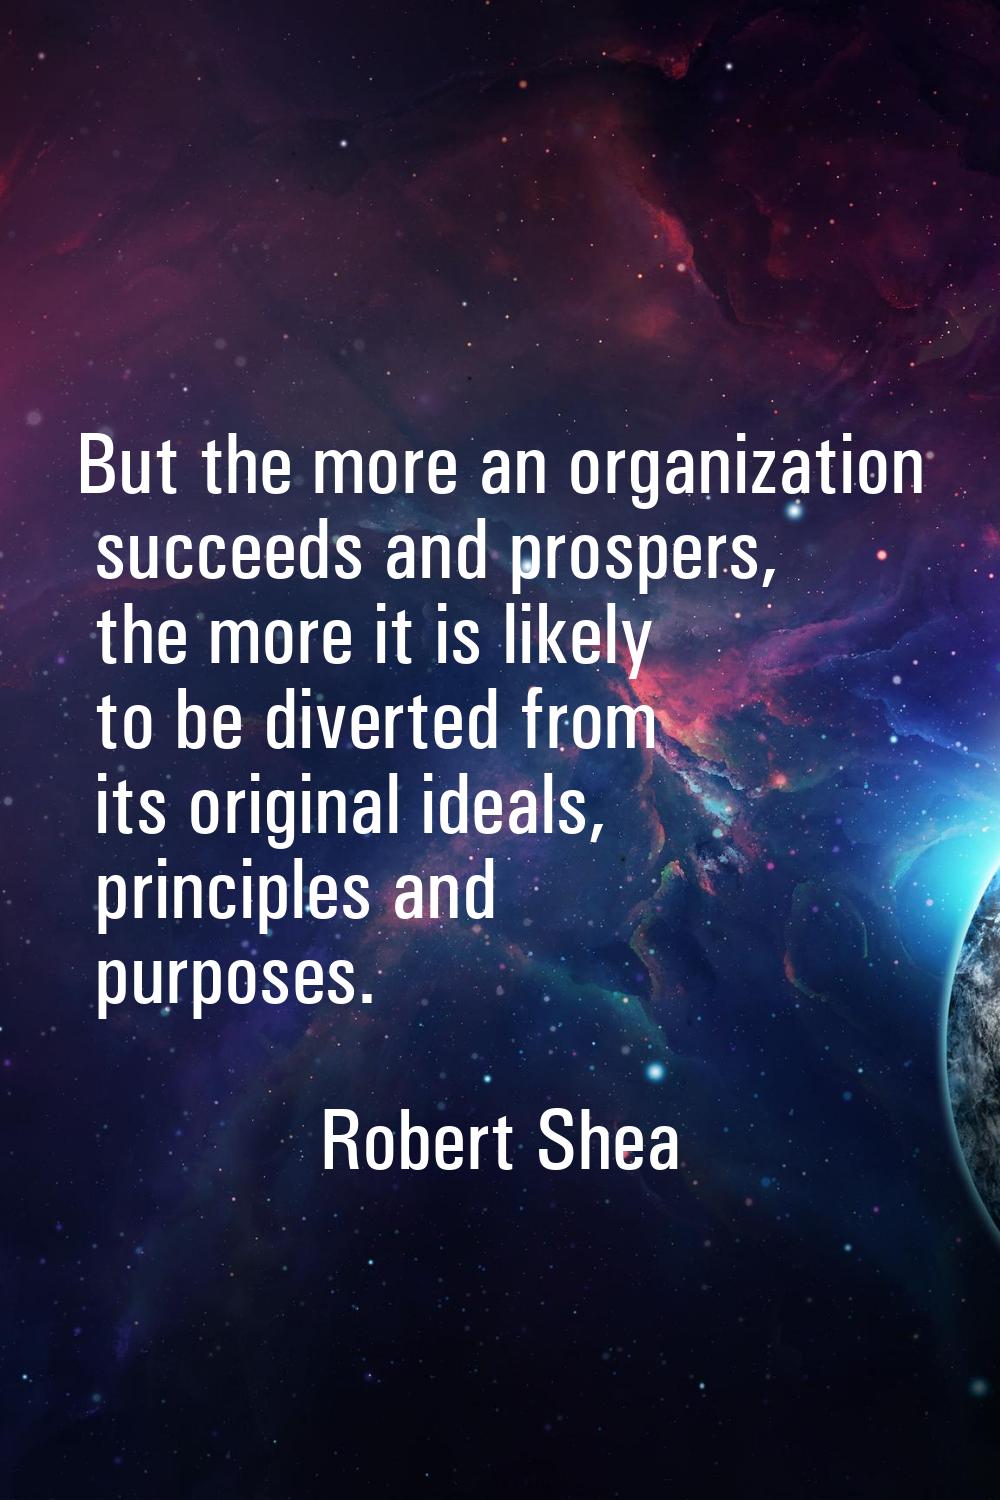 But the more an organization succeeds and prospers, the more it is likely to be diverted from its o